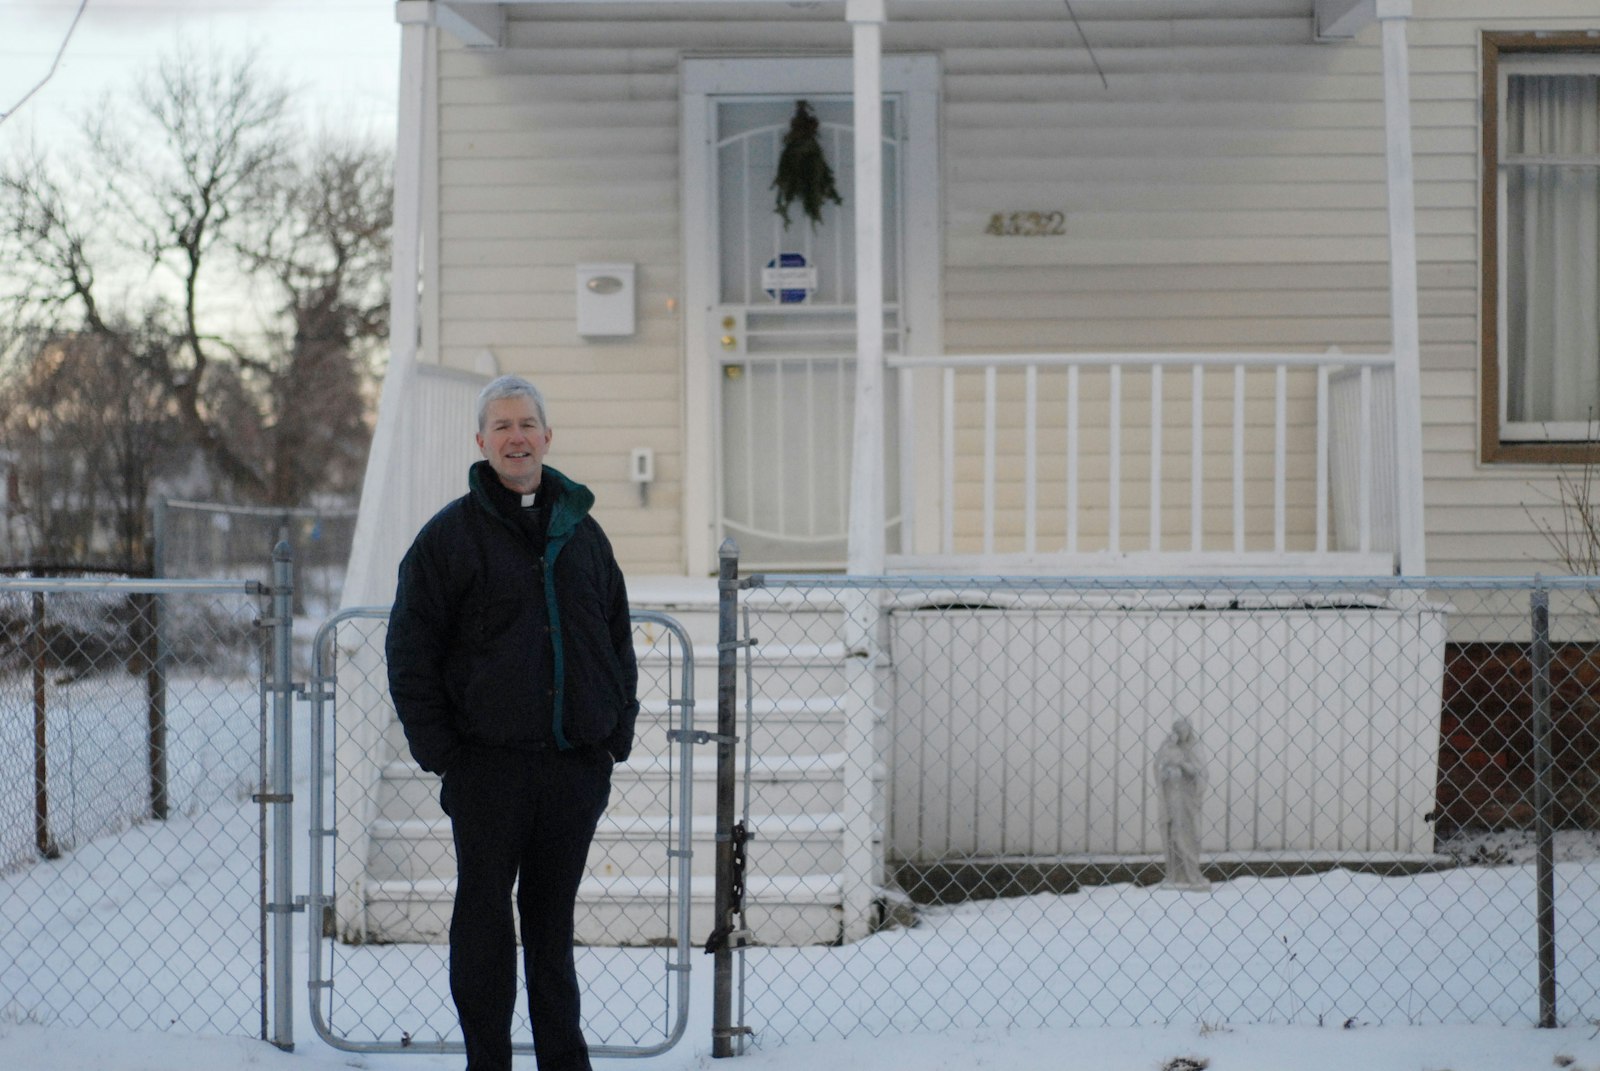 Msgr. Trapp stands in front of a house he purchased near St. Augustine and St. Monica Parish with the help of a nonprofit he formed to refurbish the neighborhood and fix up homes for those in need of low-income housing in this 2016 photo. (Michael Stechschulte | Detroit Catholic)